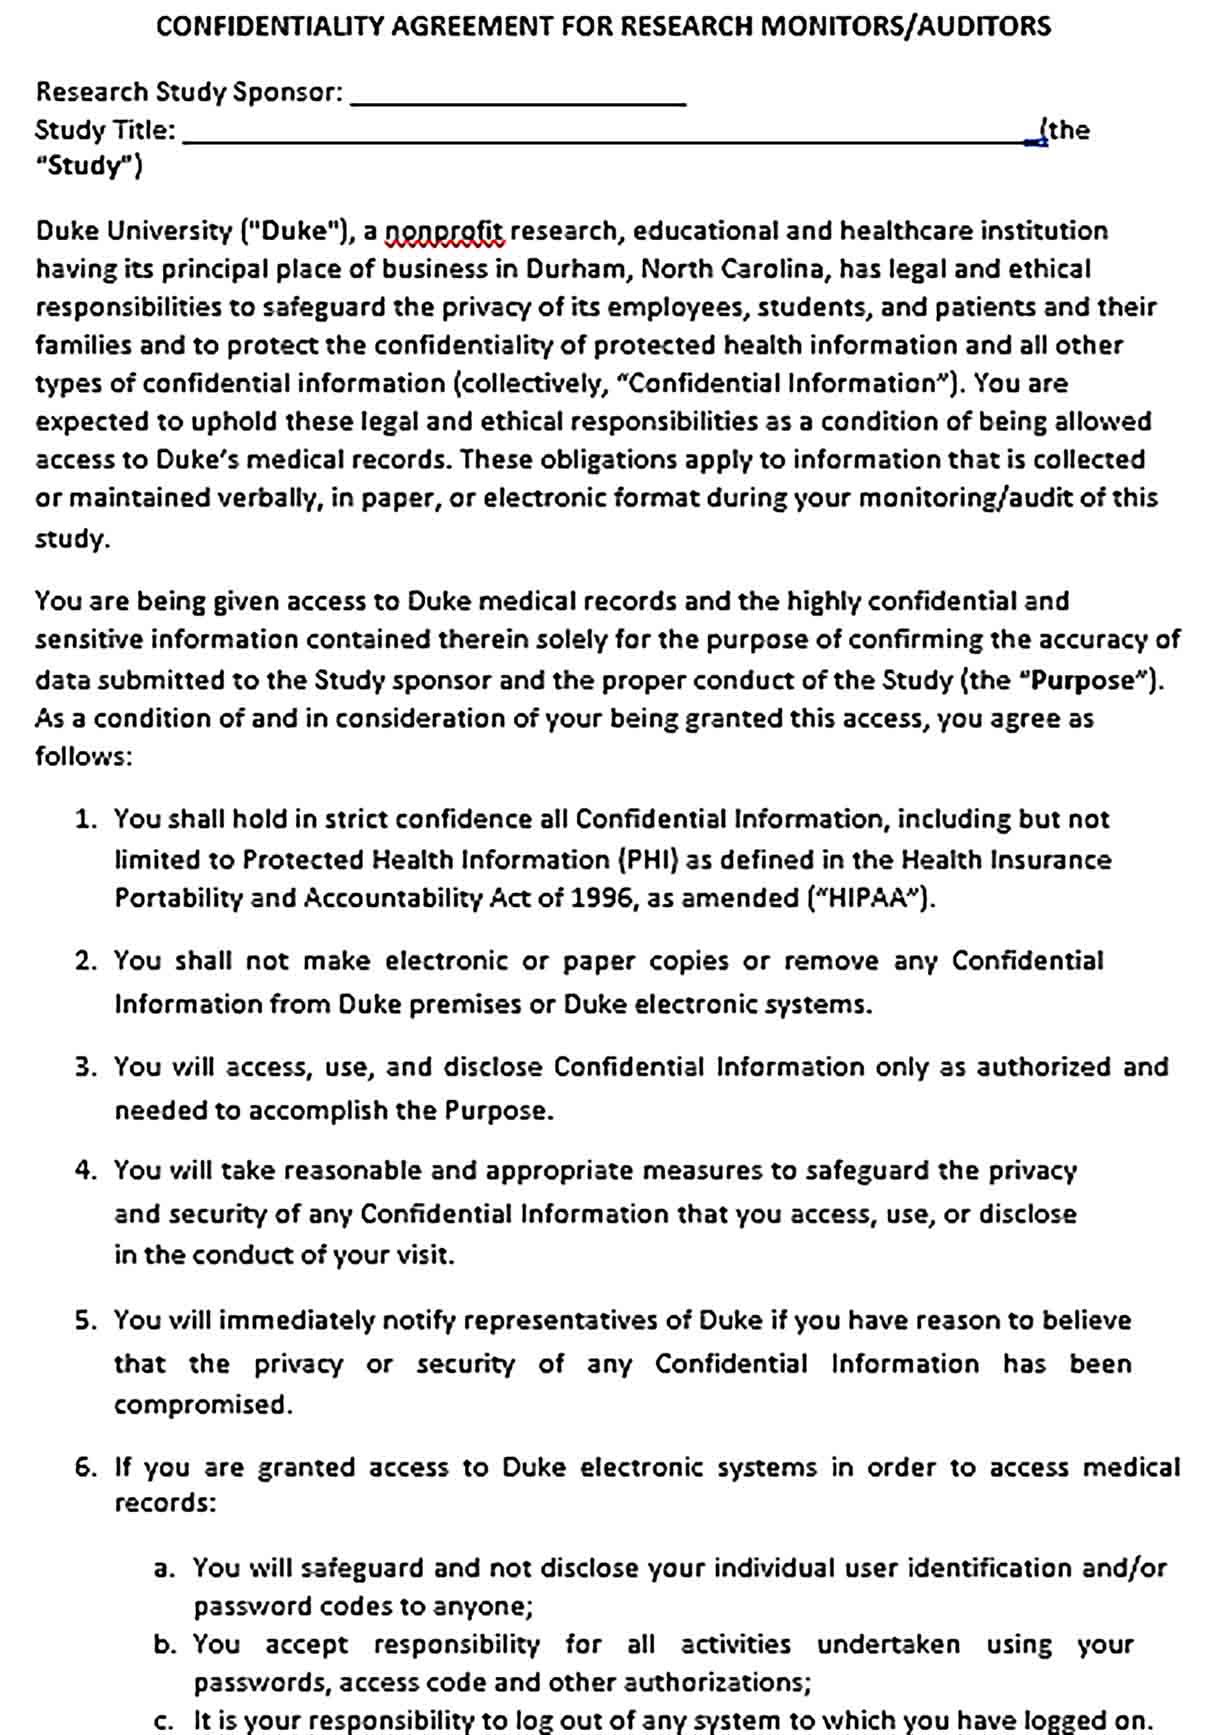 Sample Medical Research Audit Confidentiality Agreement